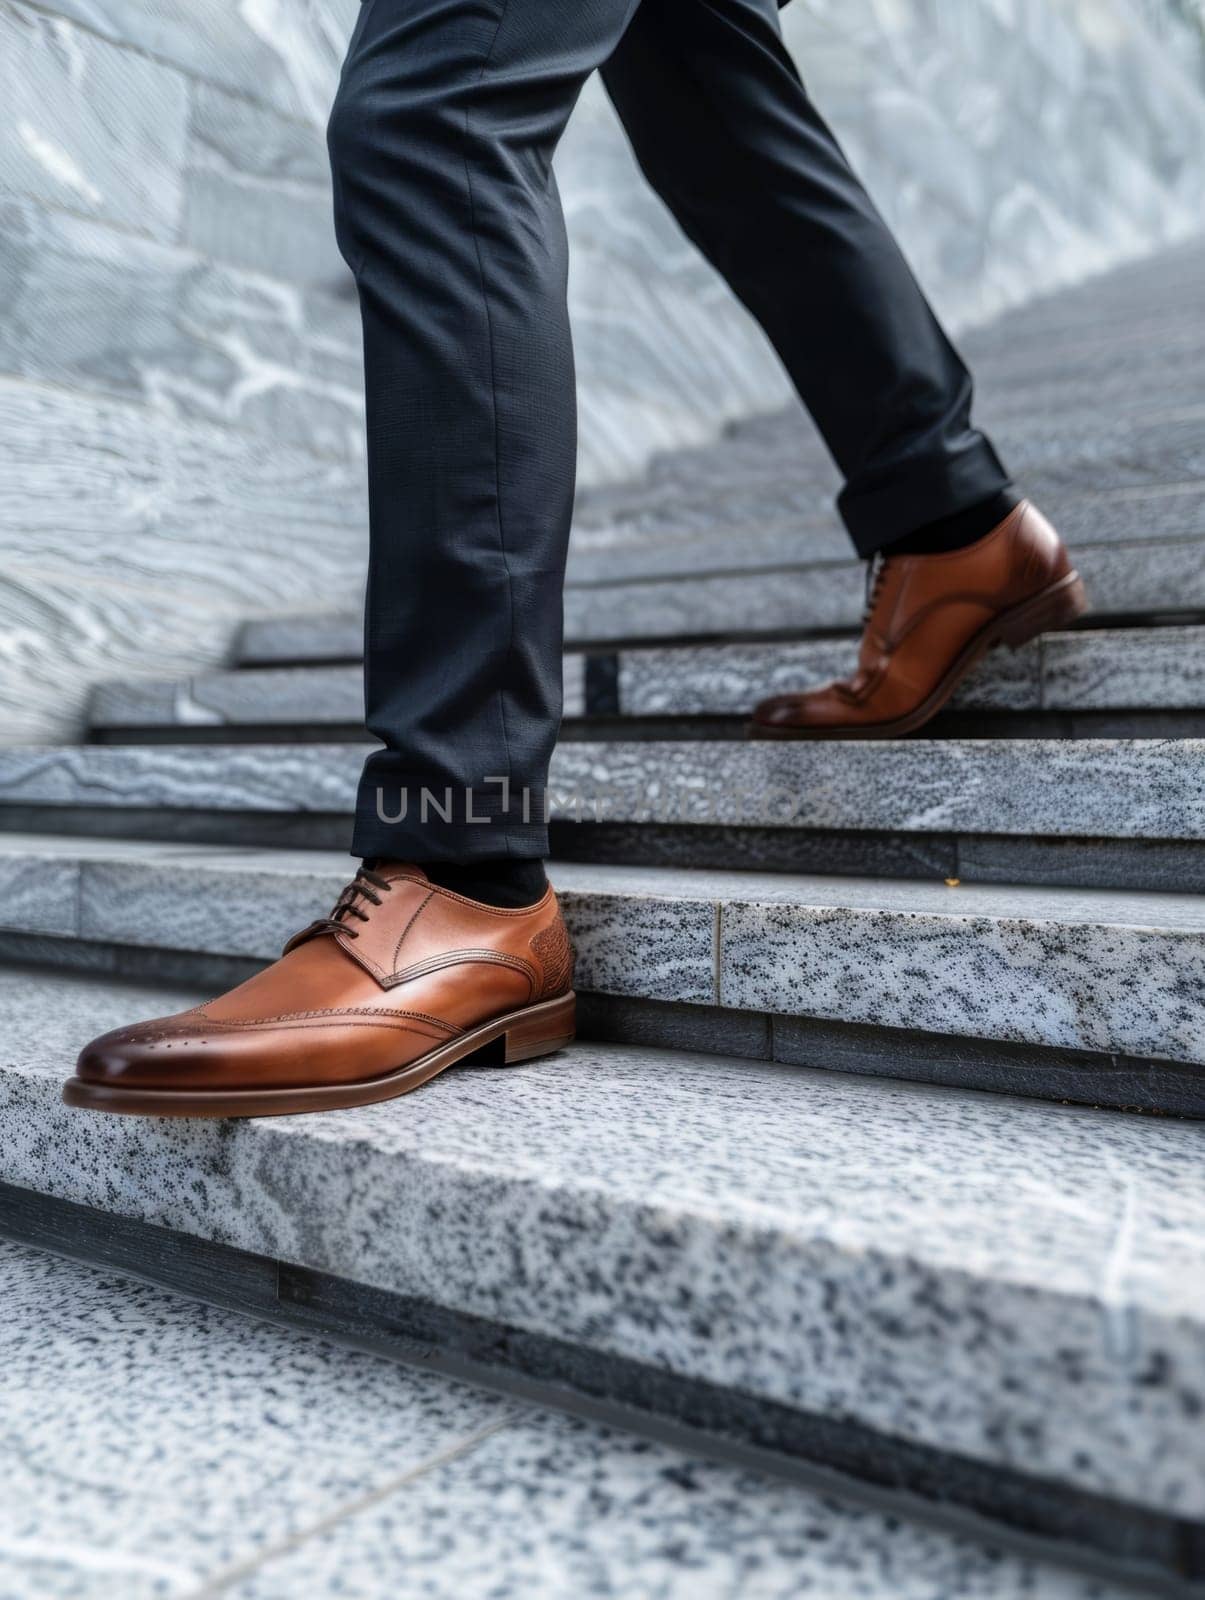 A sharply dressed individual takes a step on a granite staircase, showcasing elegant brown leather shoes in a modern setting